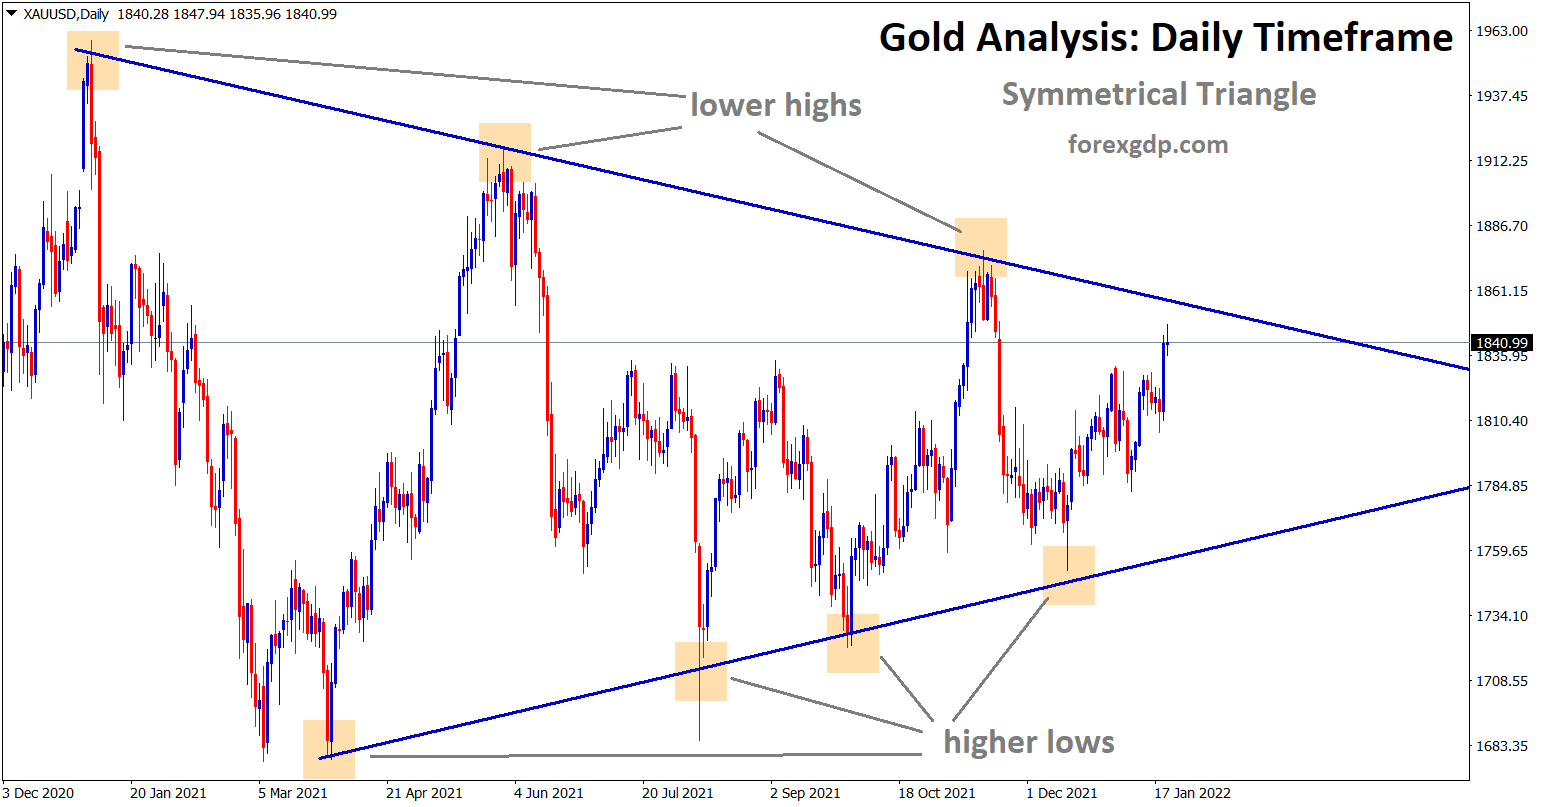 Gold symmetrical triangle formed in the daily timeframe